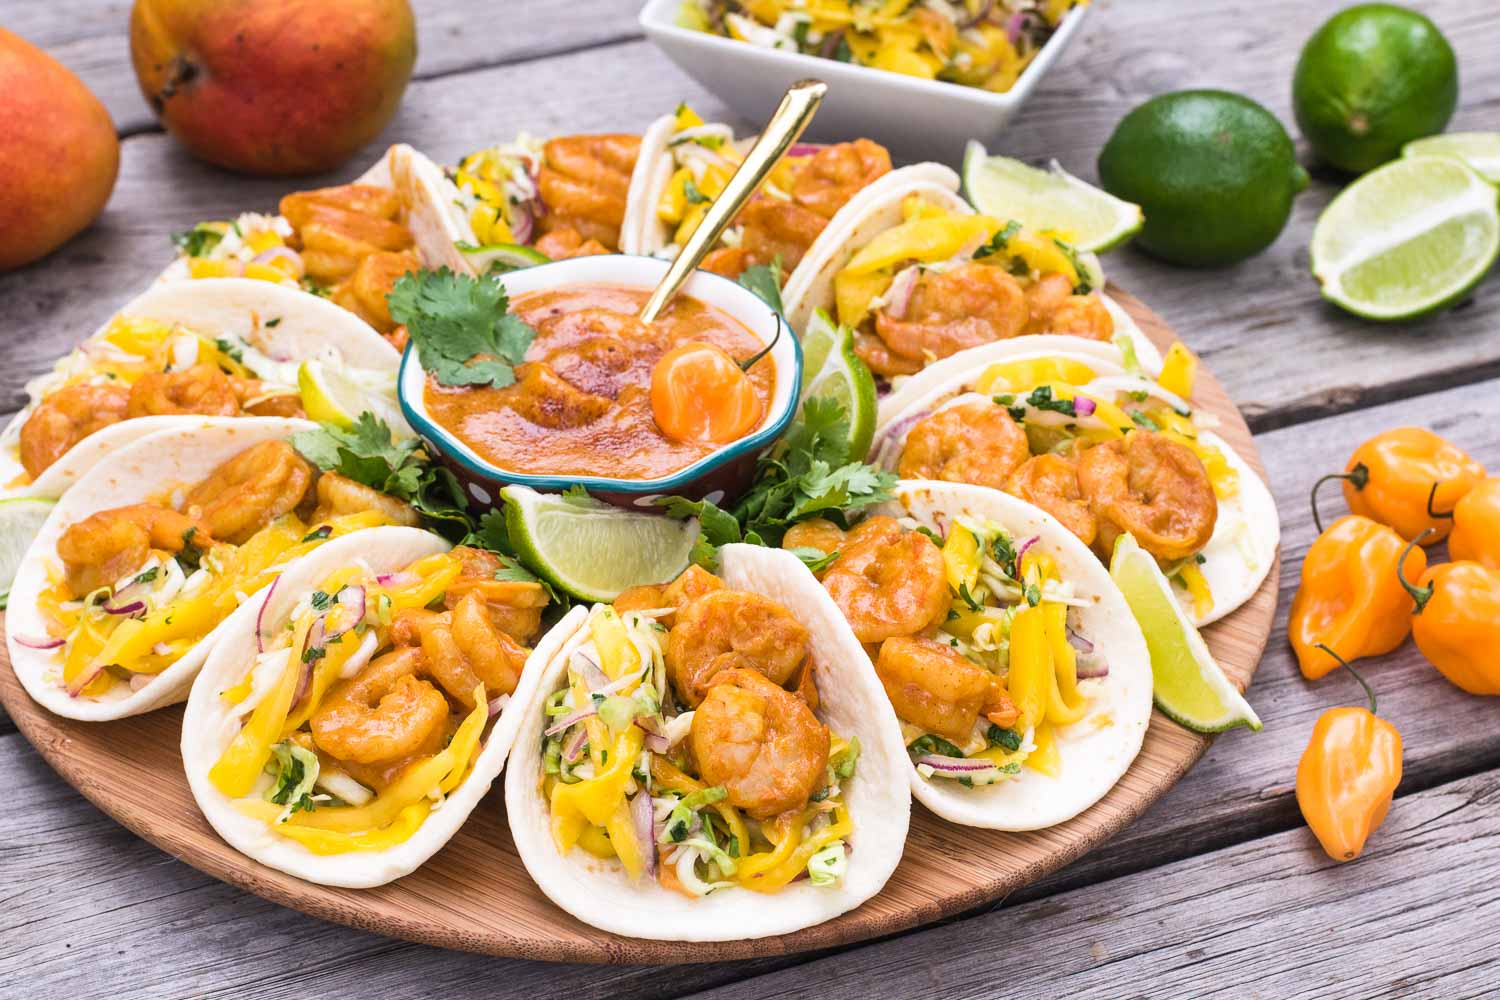 Spicy-sweet-crunchy-soft shrimp tacos are our summer anthem! Perfect excuse to marry Indian & Mexican with the bright, peppy flavors of mango & habanero.